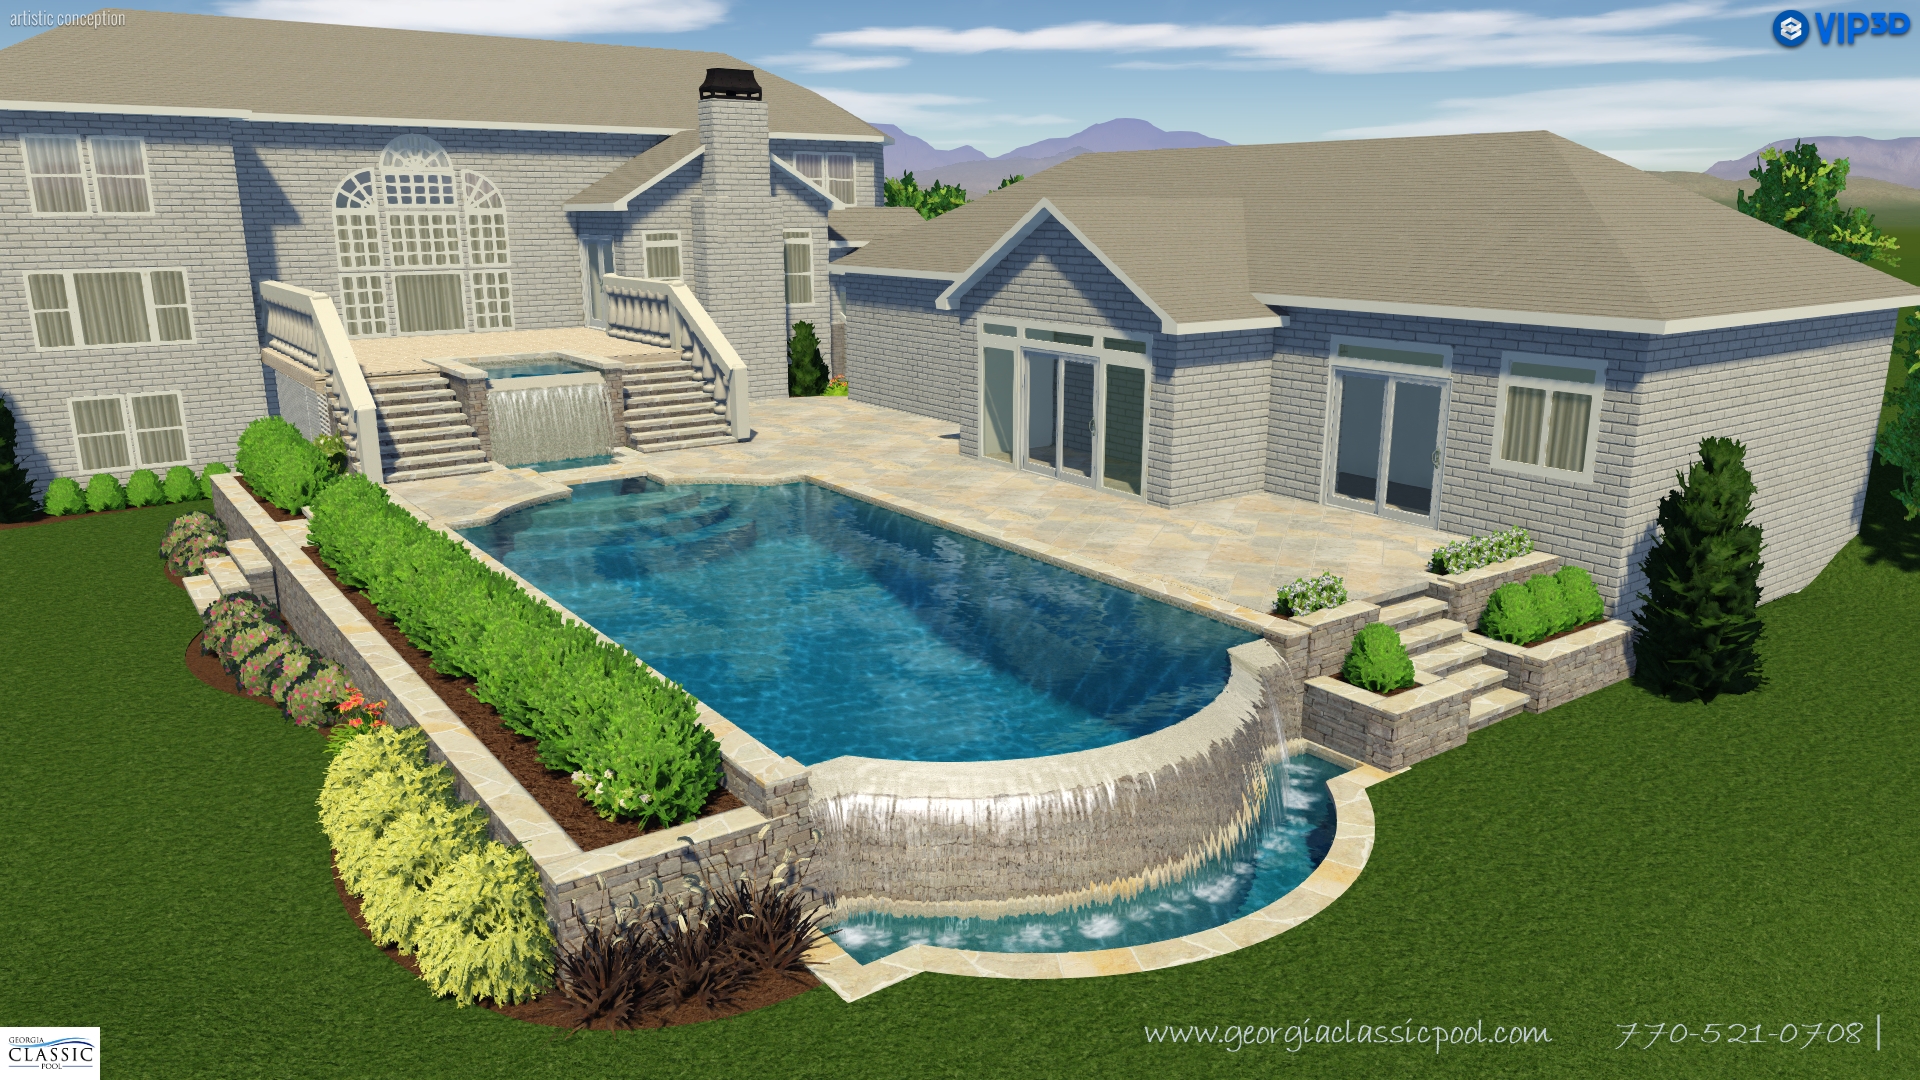 A 3D rendering of a modern pool with a vanishing edge, creating the illusion of infinity.